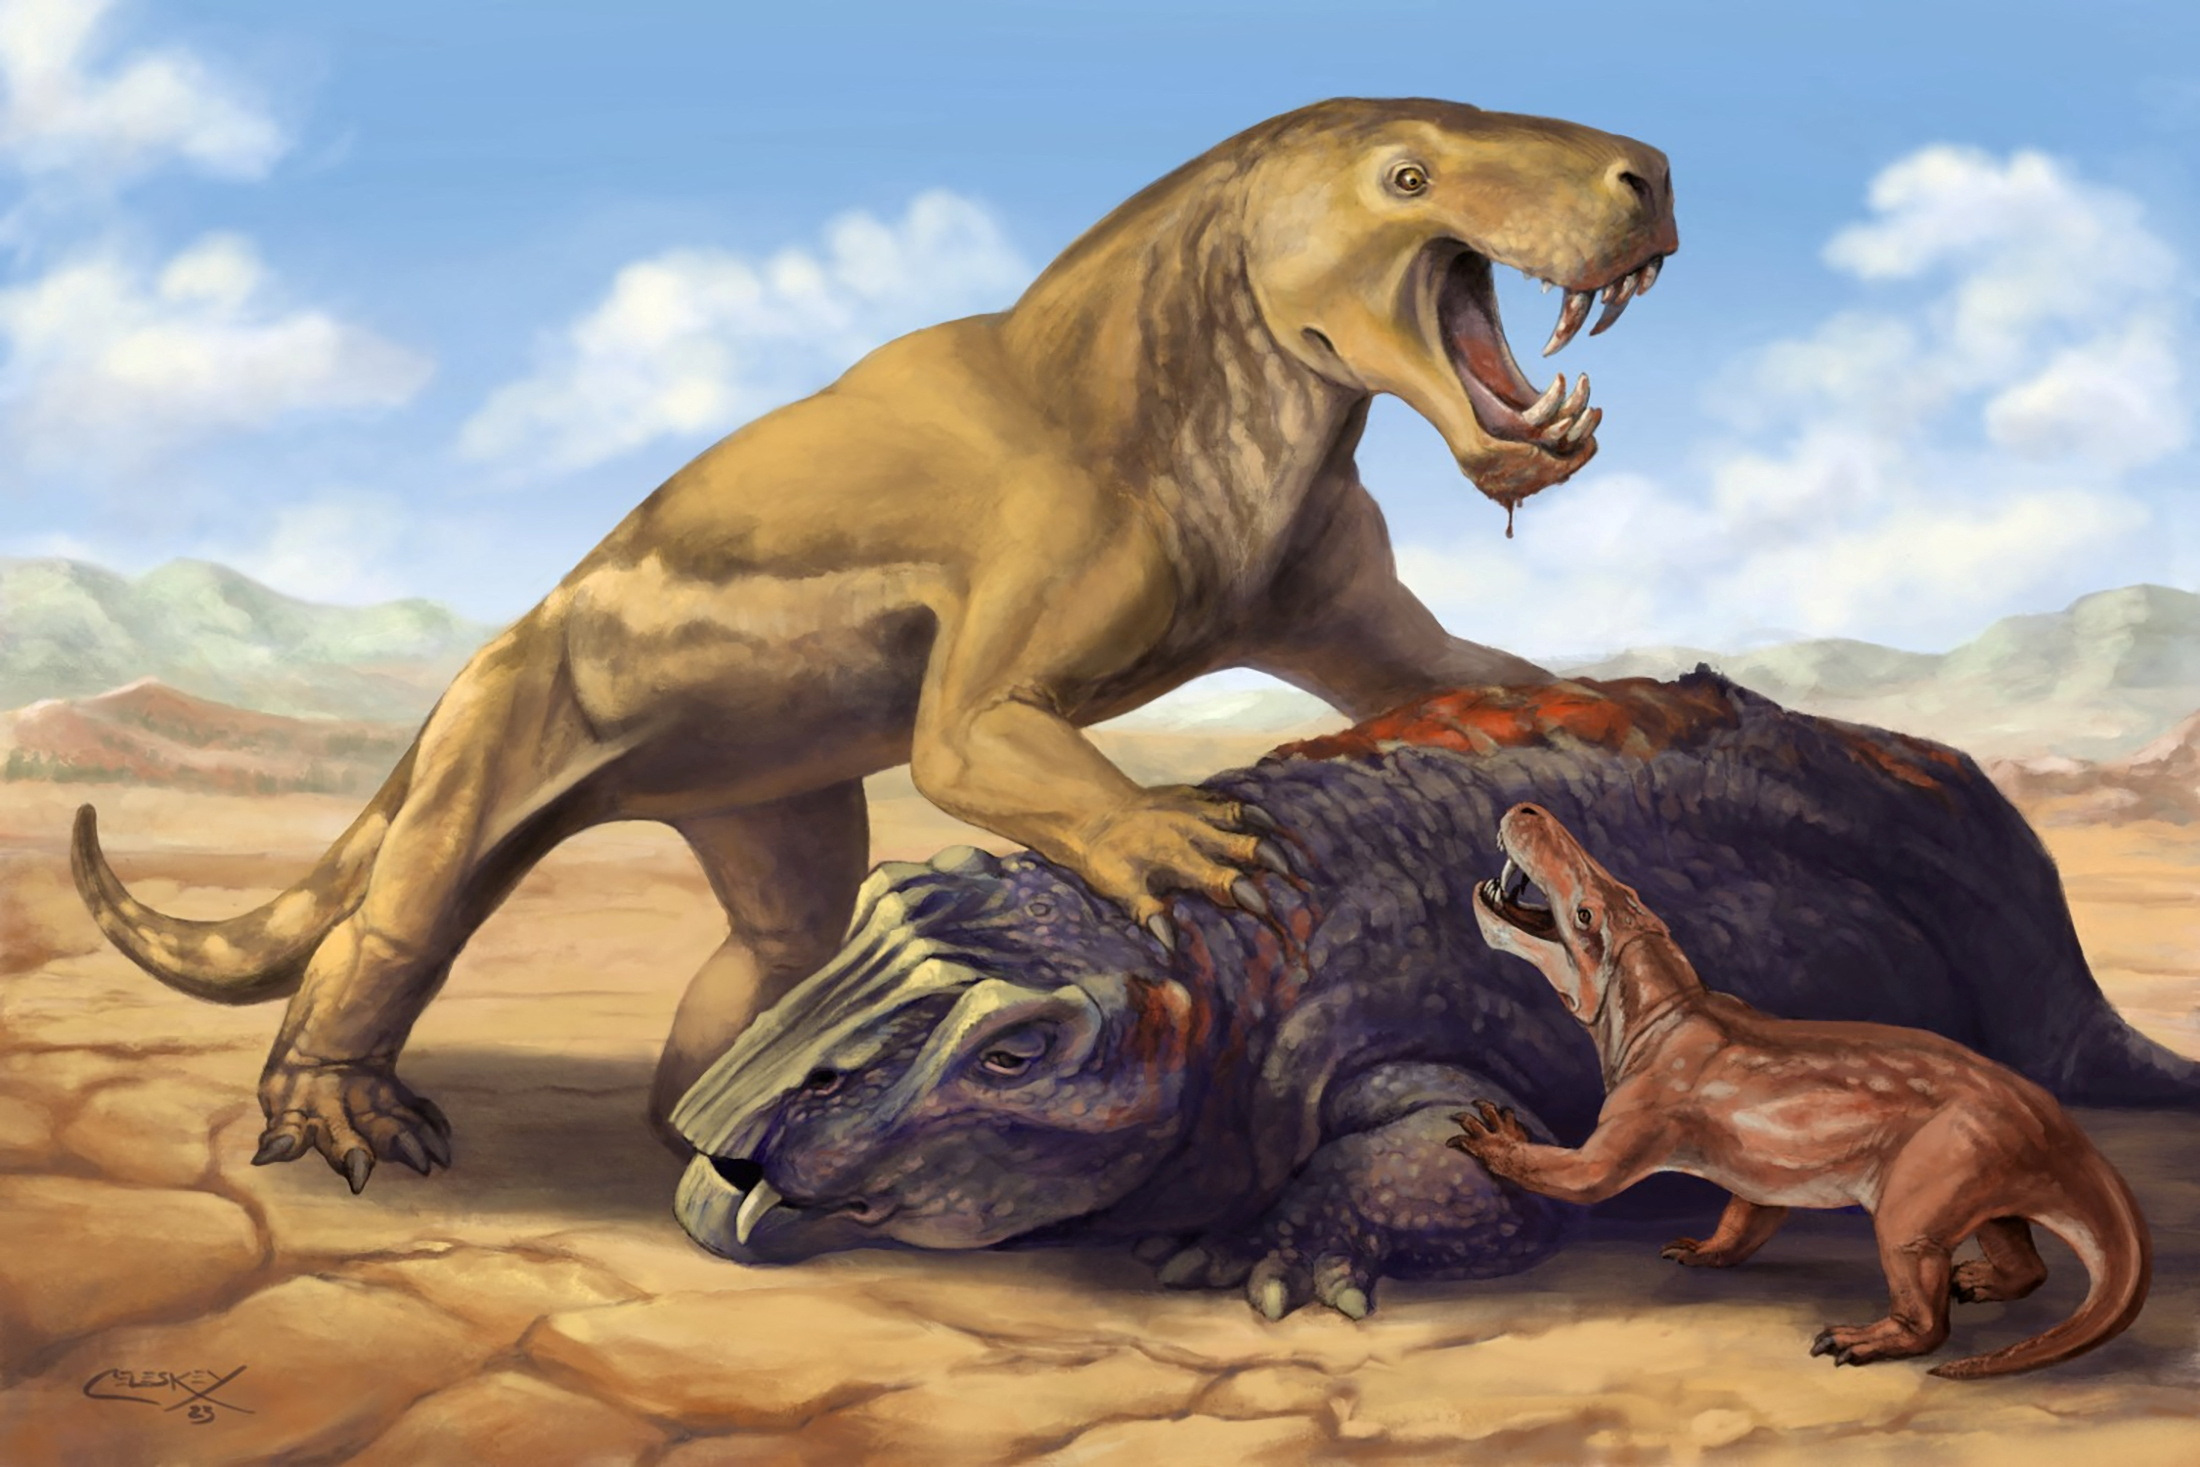 Illustration shows the Permian Period tiger-sized saber-toothed protomammal Inostrancevia atop its dicynodont prey